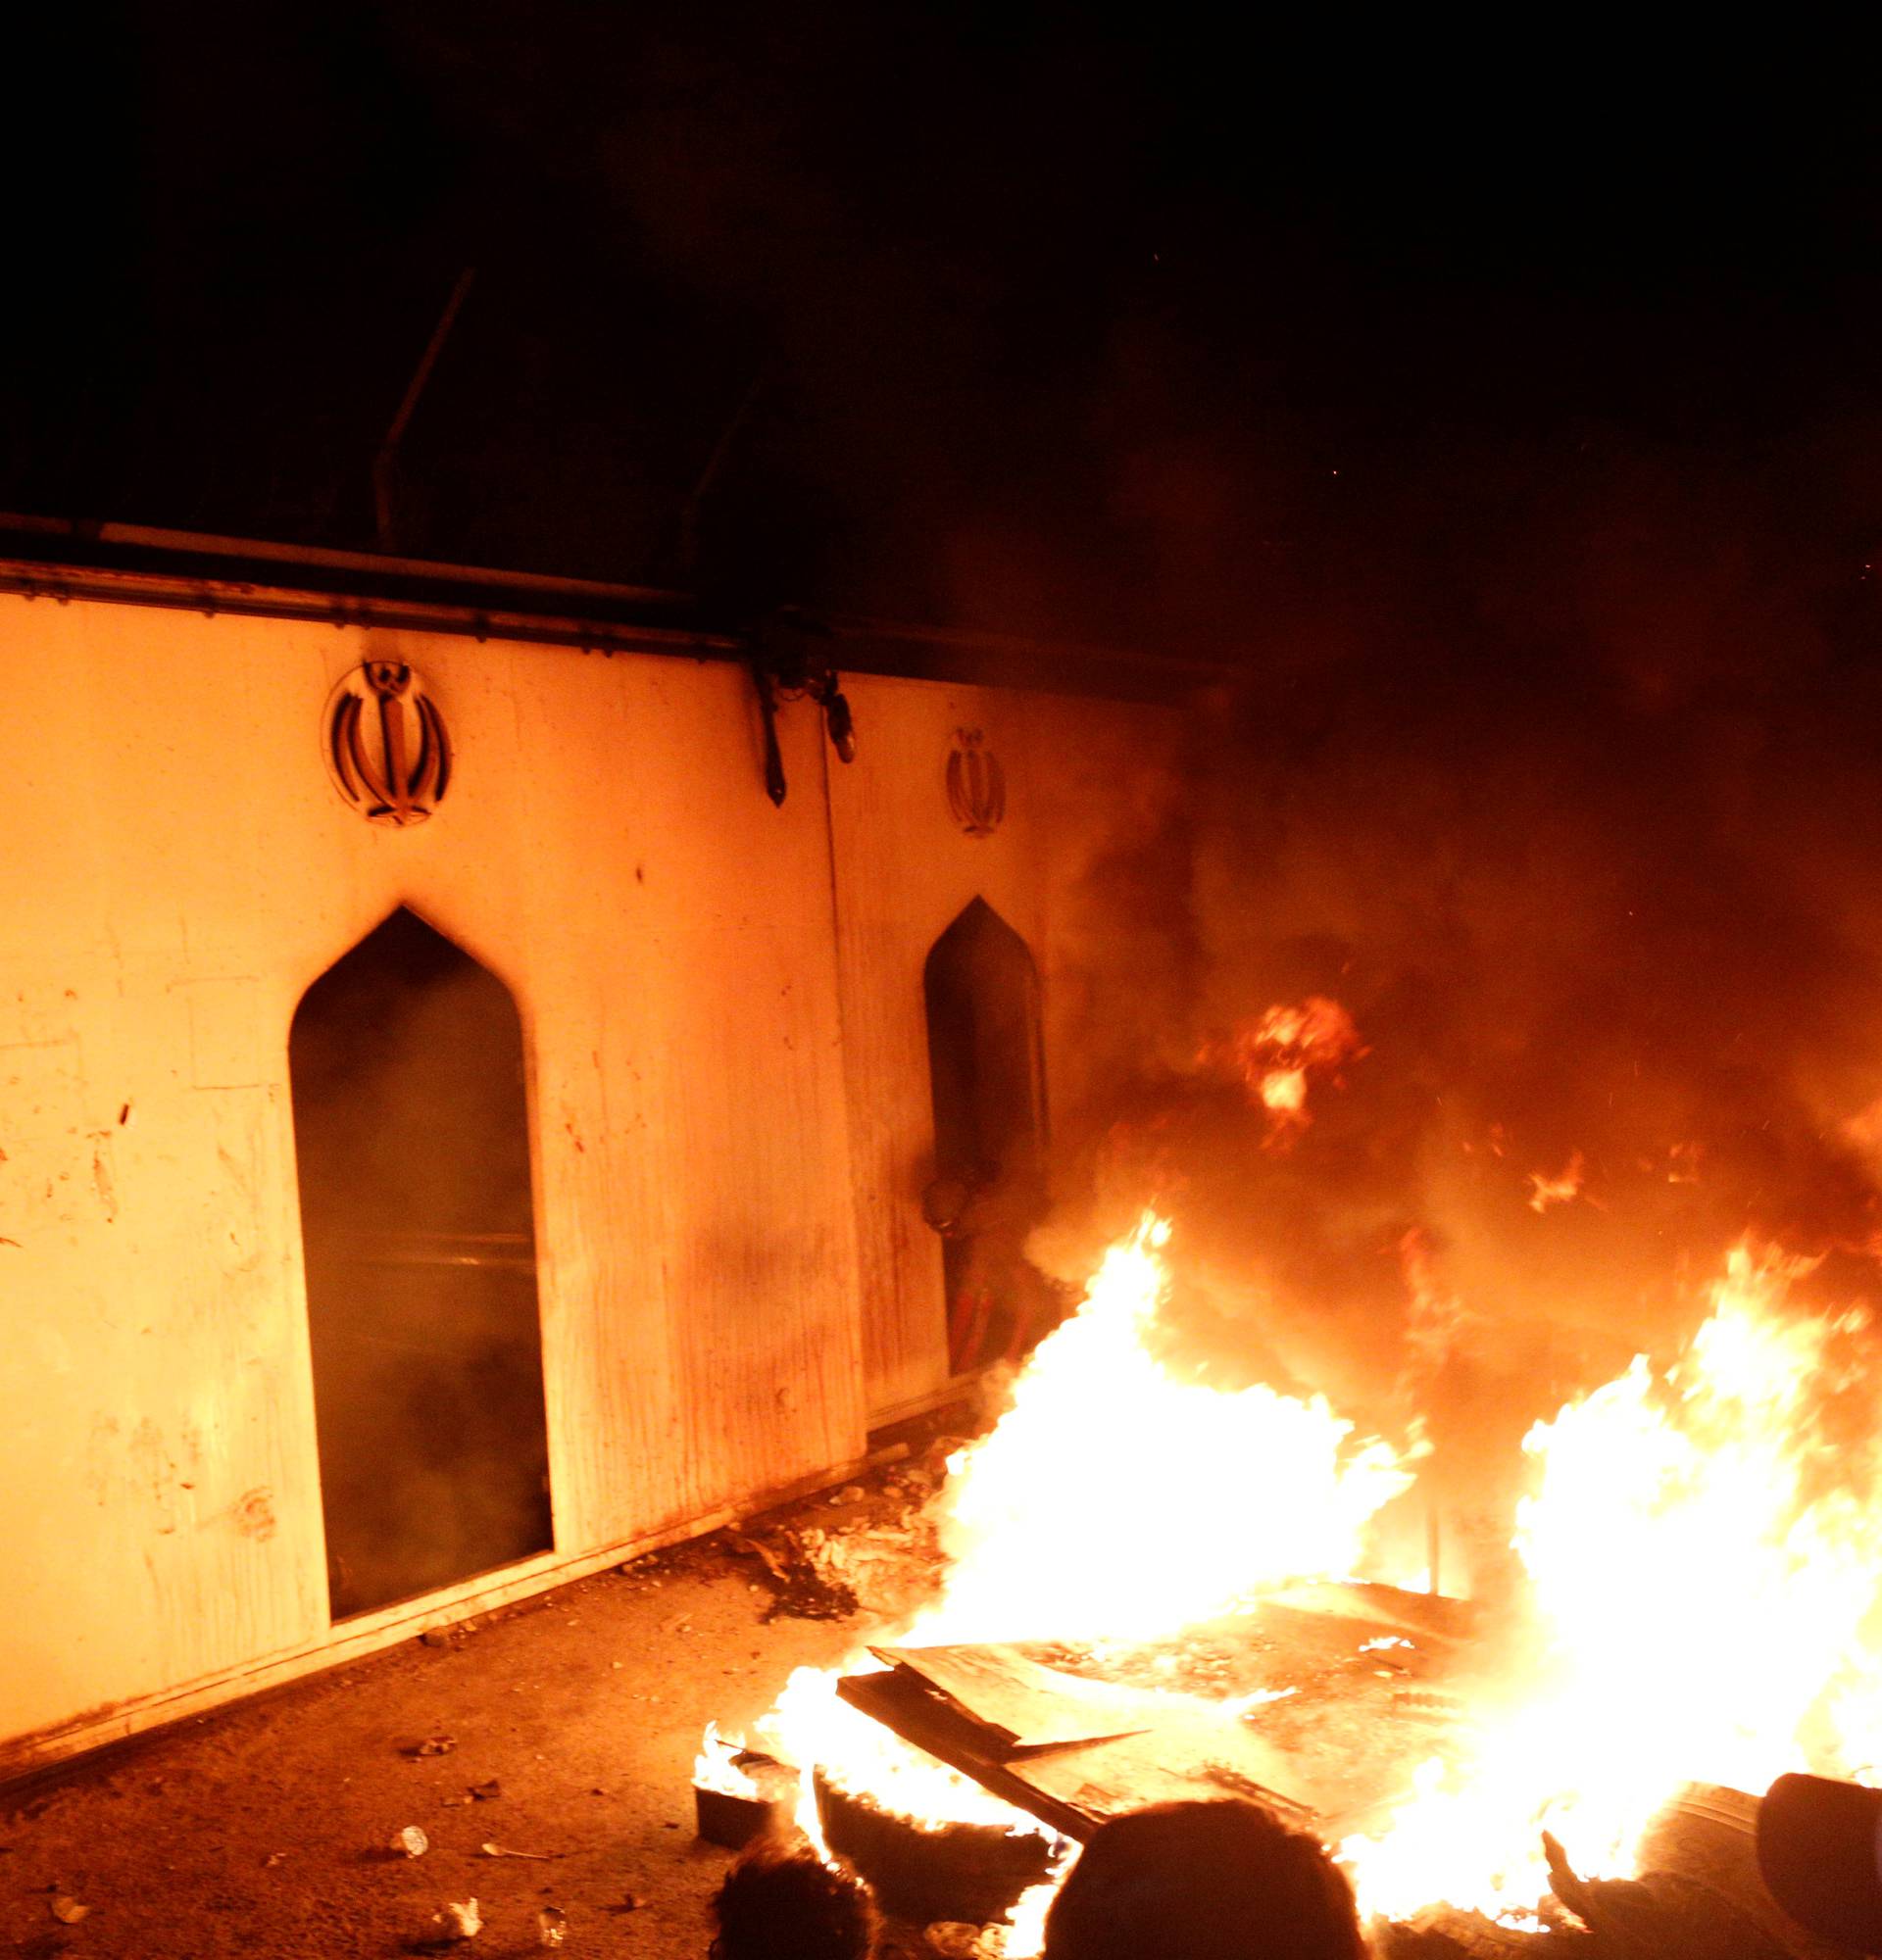 Demonstrators set fire in front of the Iranian consulate, as they gather during ongoing anti-government protests in Najaf